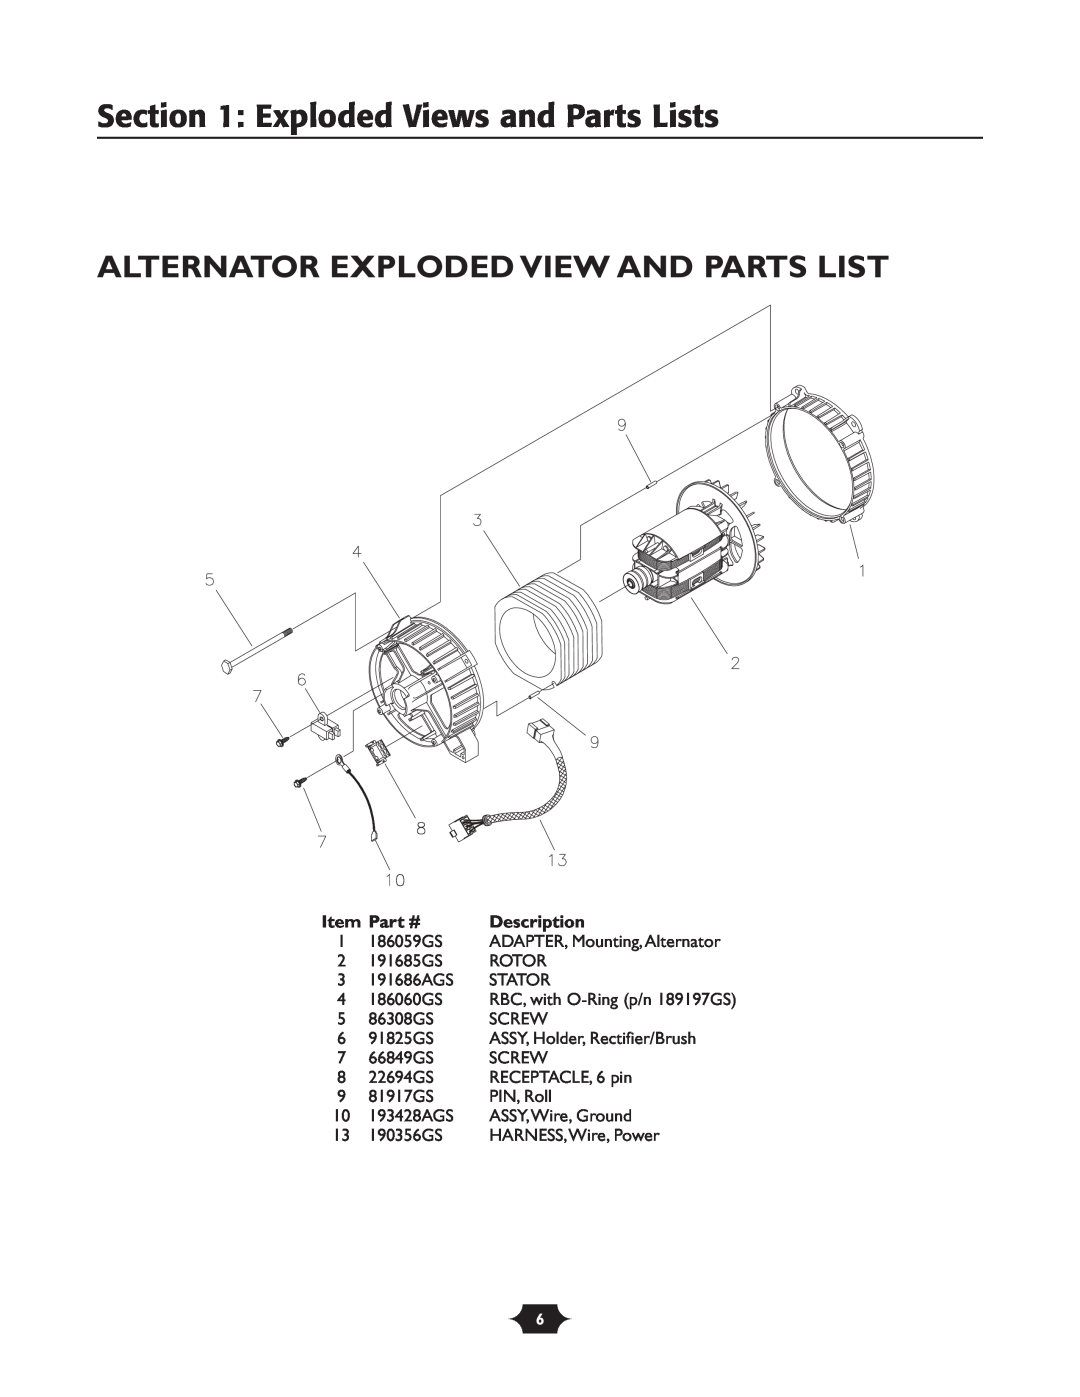 Troy-Bilt 1924 manual Alternator Exploded View And Parts List, Exploded Views and Parts Lists, Description 